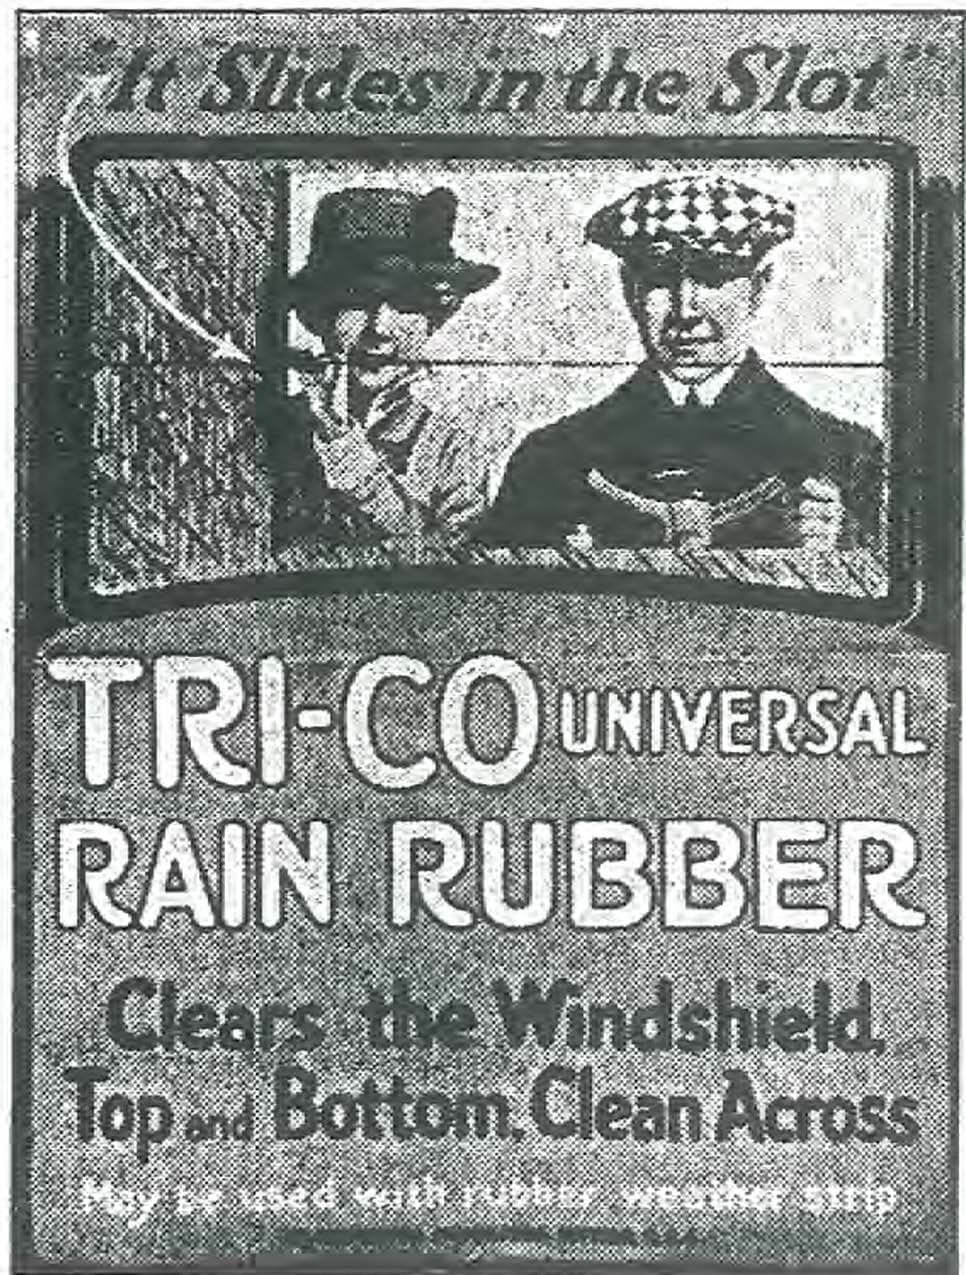 Early ad for Rain Rubber